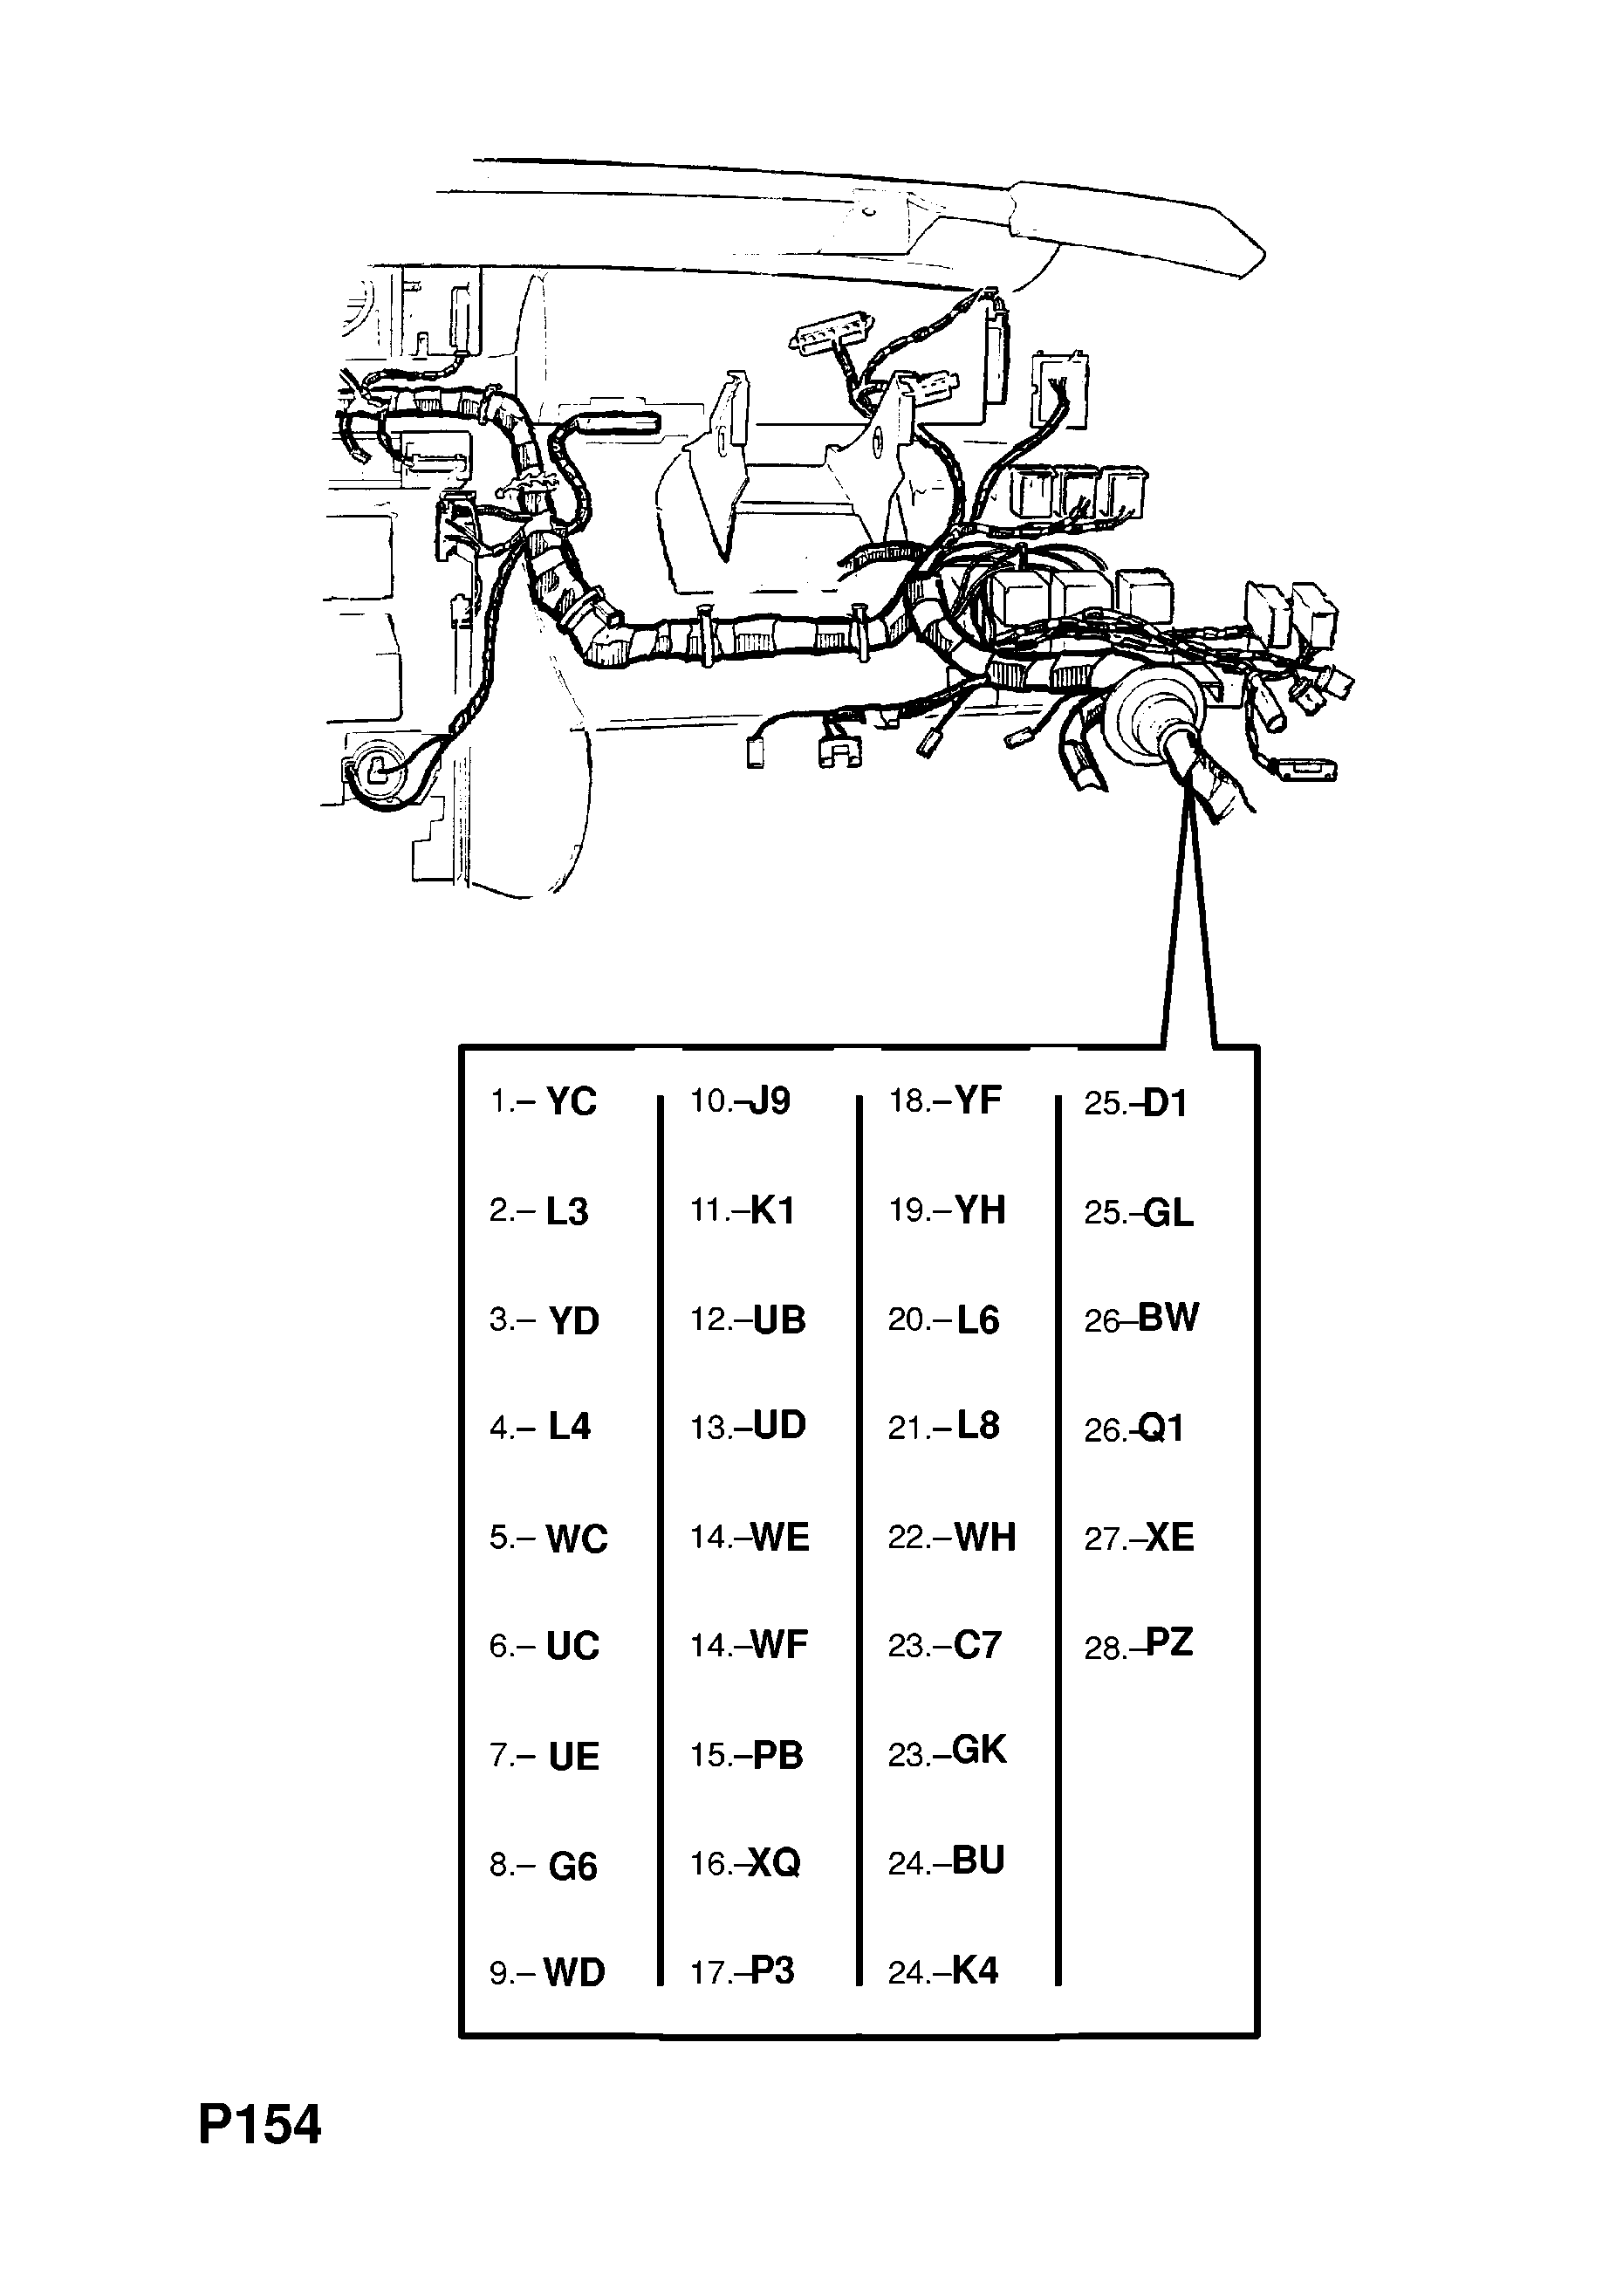 INSTRUMENT PANEL WIRING HARNESS (CONTD.) <small><i>[M1000001- FOR AUTOMATIC TRANSMISSION EXCEPT AIR CONDITIONING AND LCD INSTRUMENTS]</i></small>